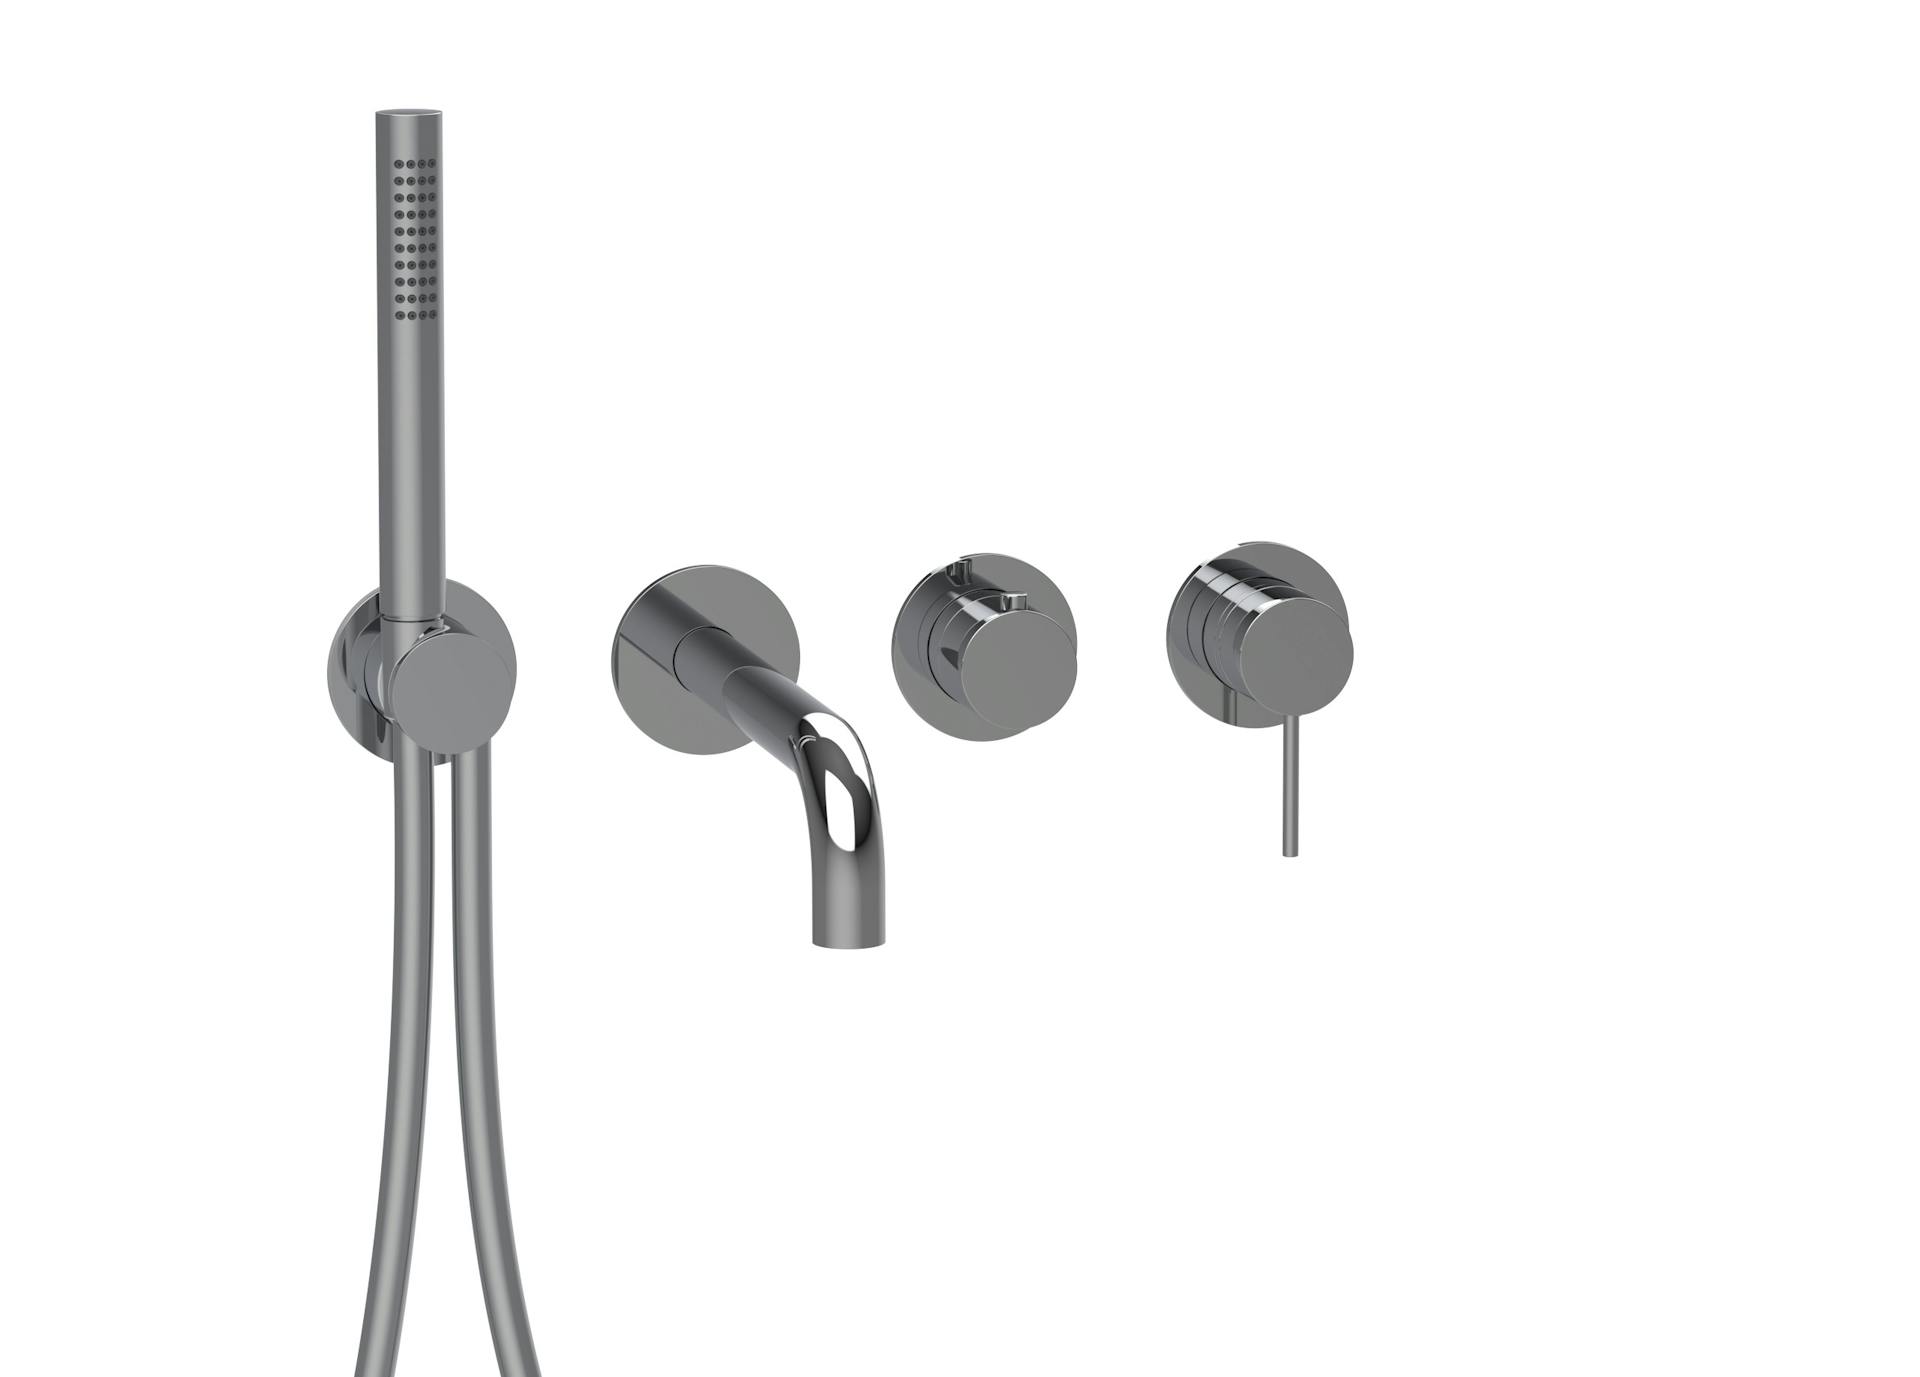 2 | 3-way single lever mixer  4 holes round  rosettes and round handles trim set for bath tub